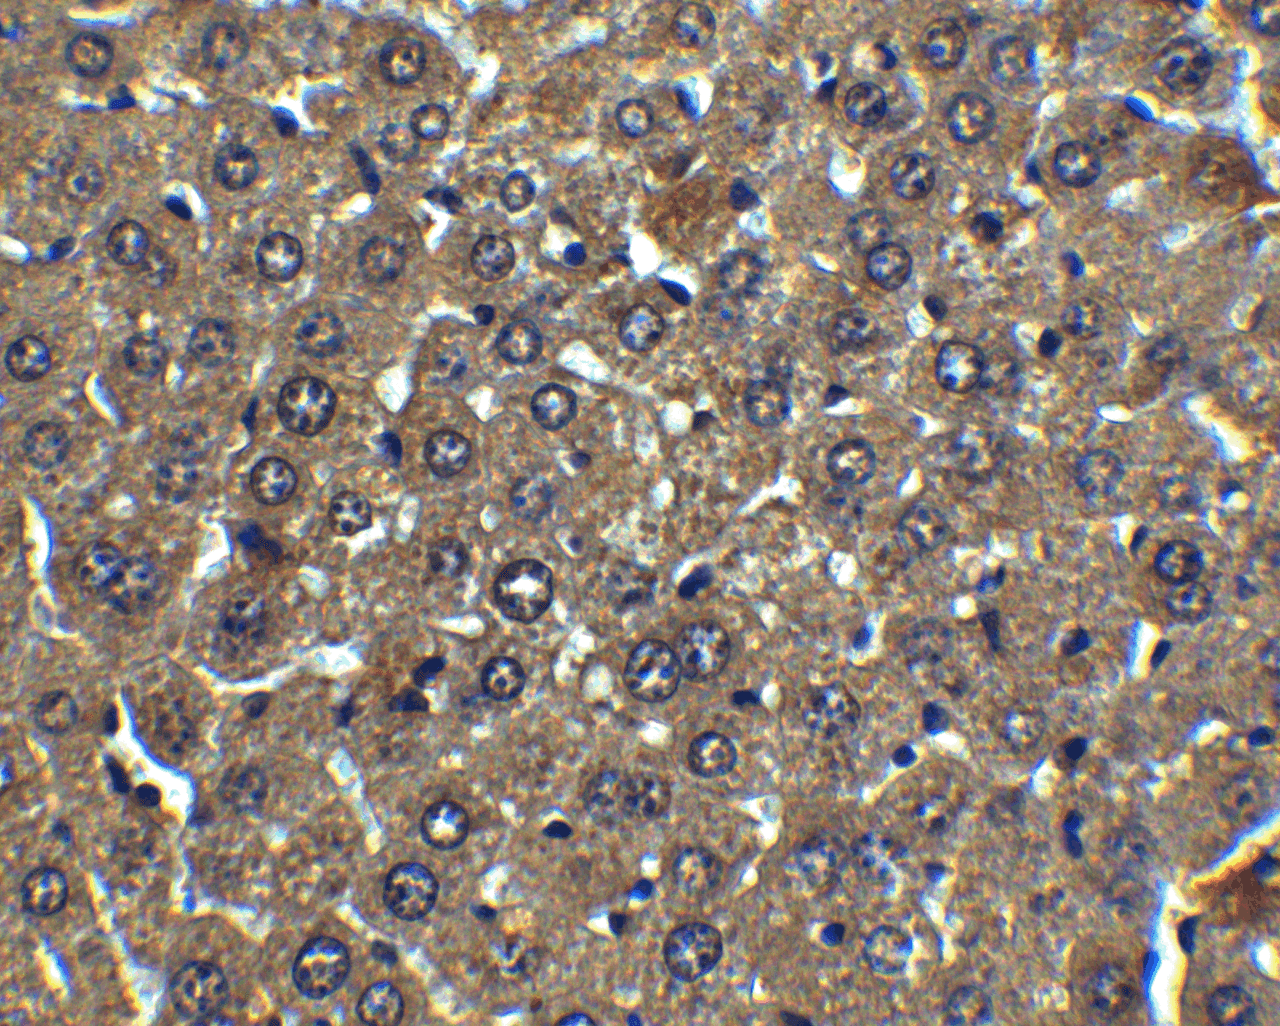 Immunohistochemistry of Albumin in mouse liver tissue with Albumin antibody at 5 ug/mL.